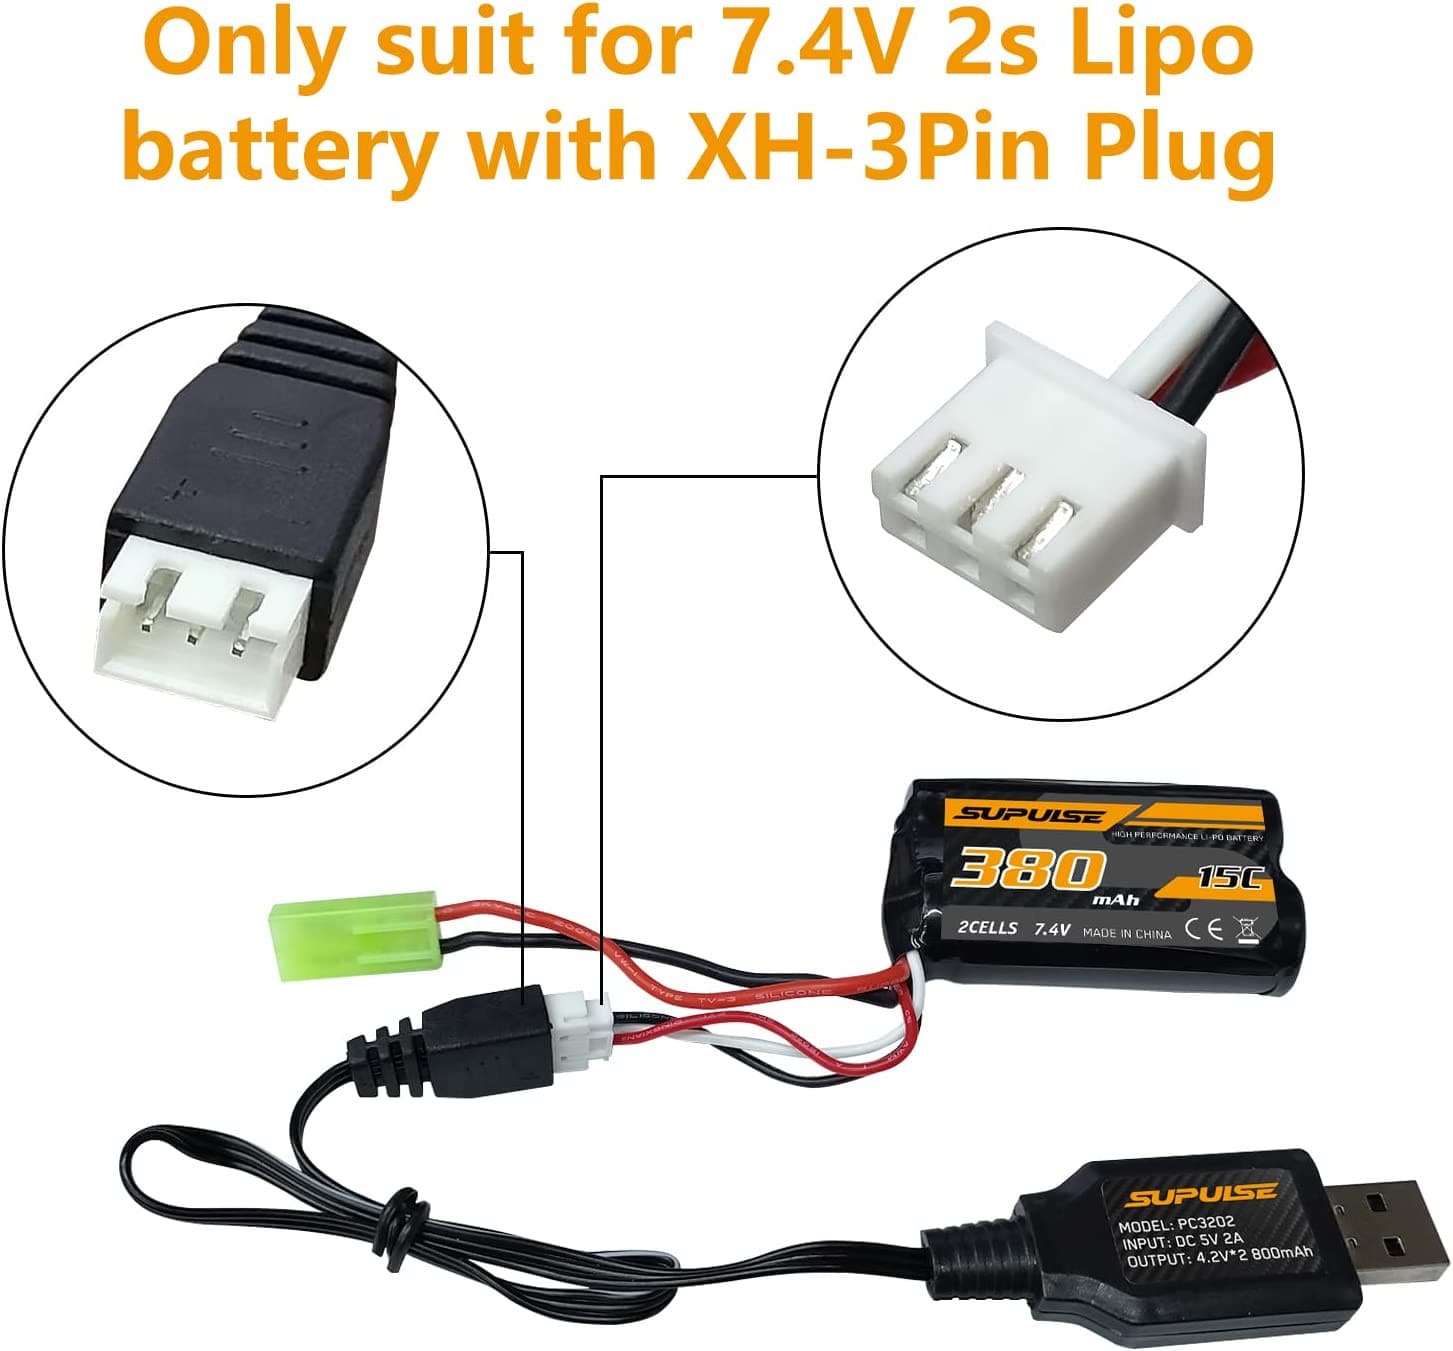 SUPULSE RC Spare parts: 2S USB Charger for LiPo Battery XH-3Pin Plug